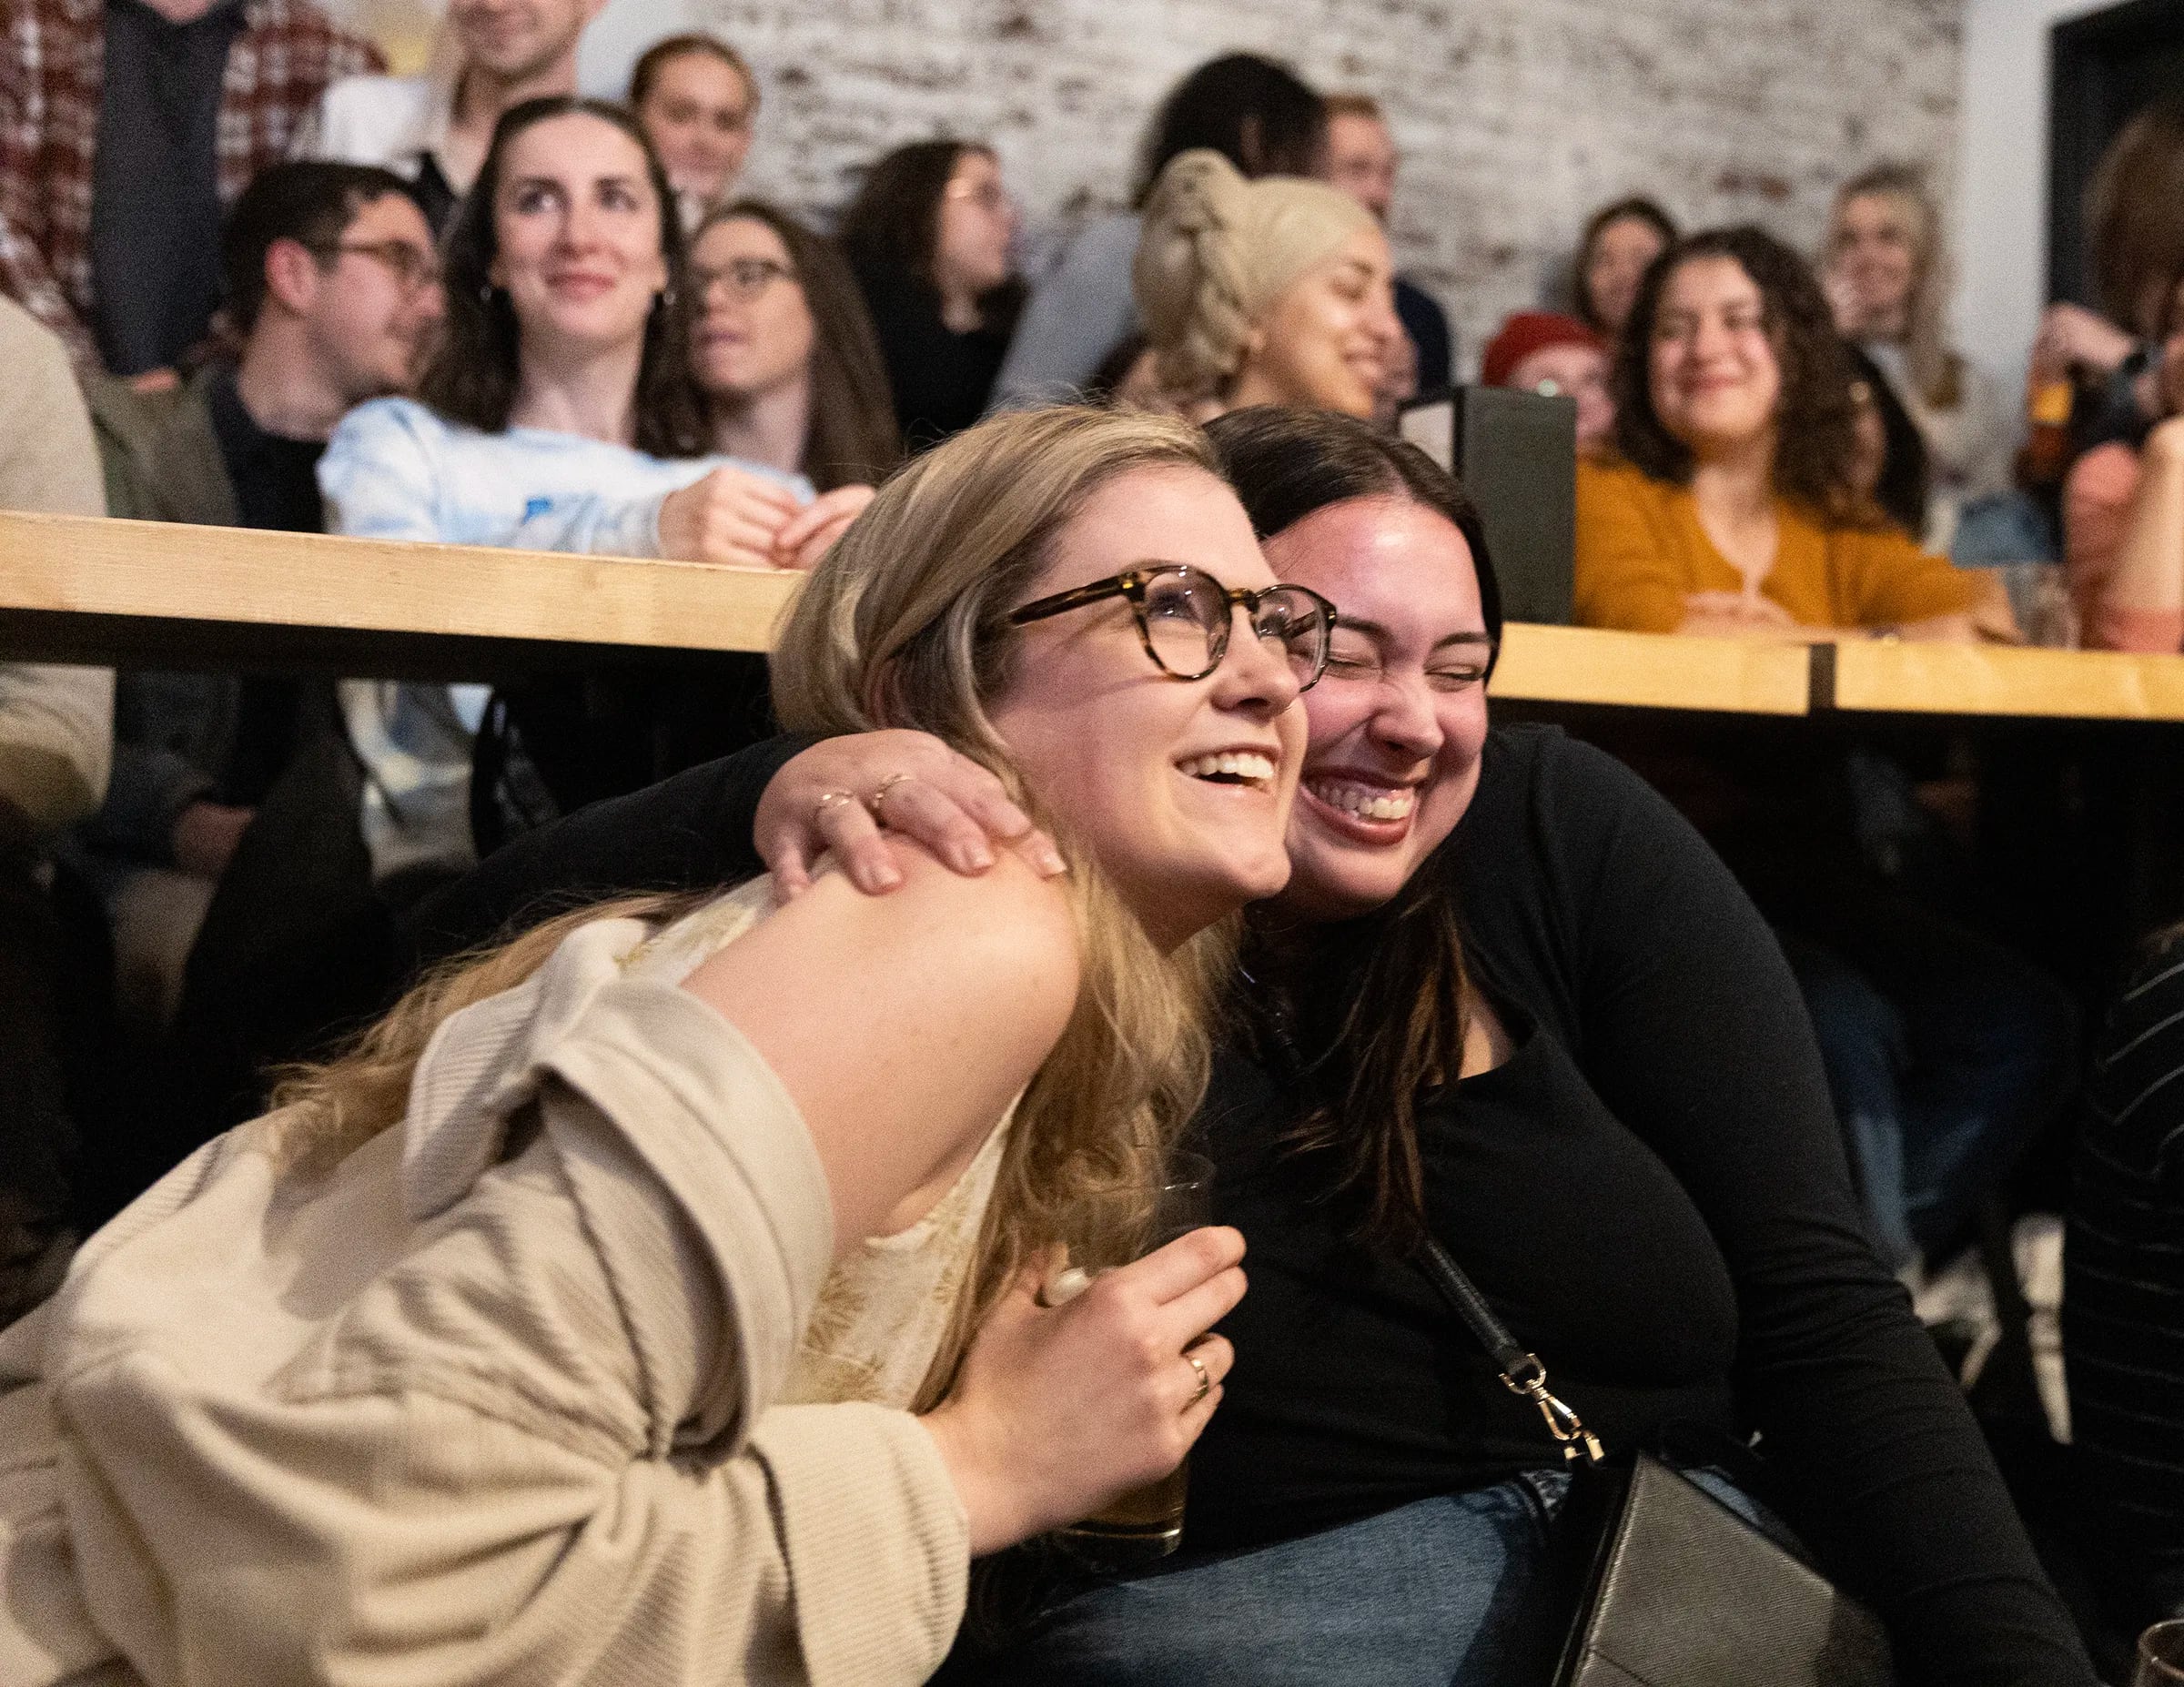 Kristen Coyne (left) gets a hug from Kayli McGlynn after Coyne made a presentation on her behalf at an event at Meyers Brewing.